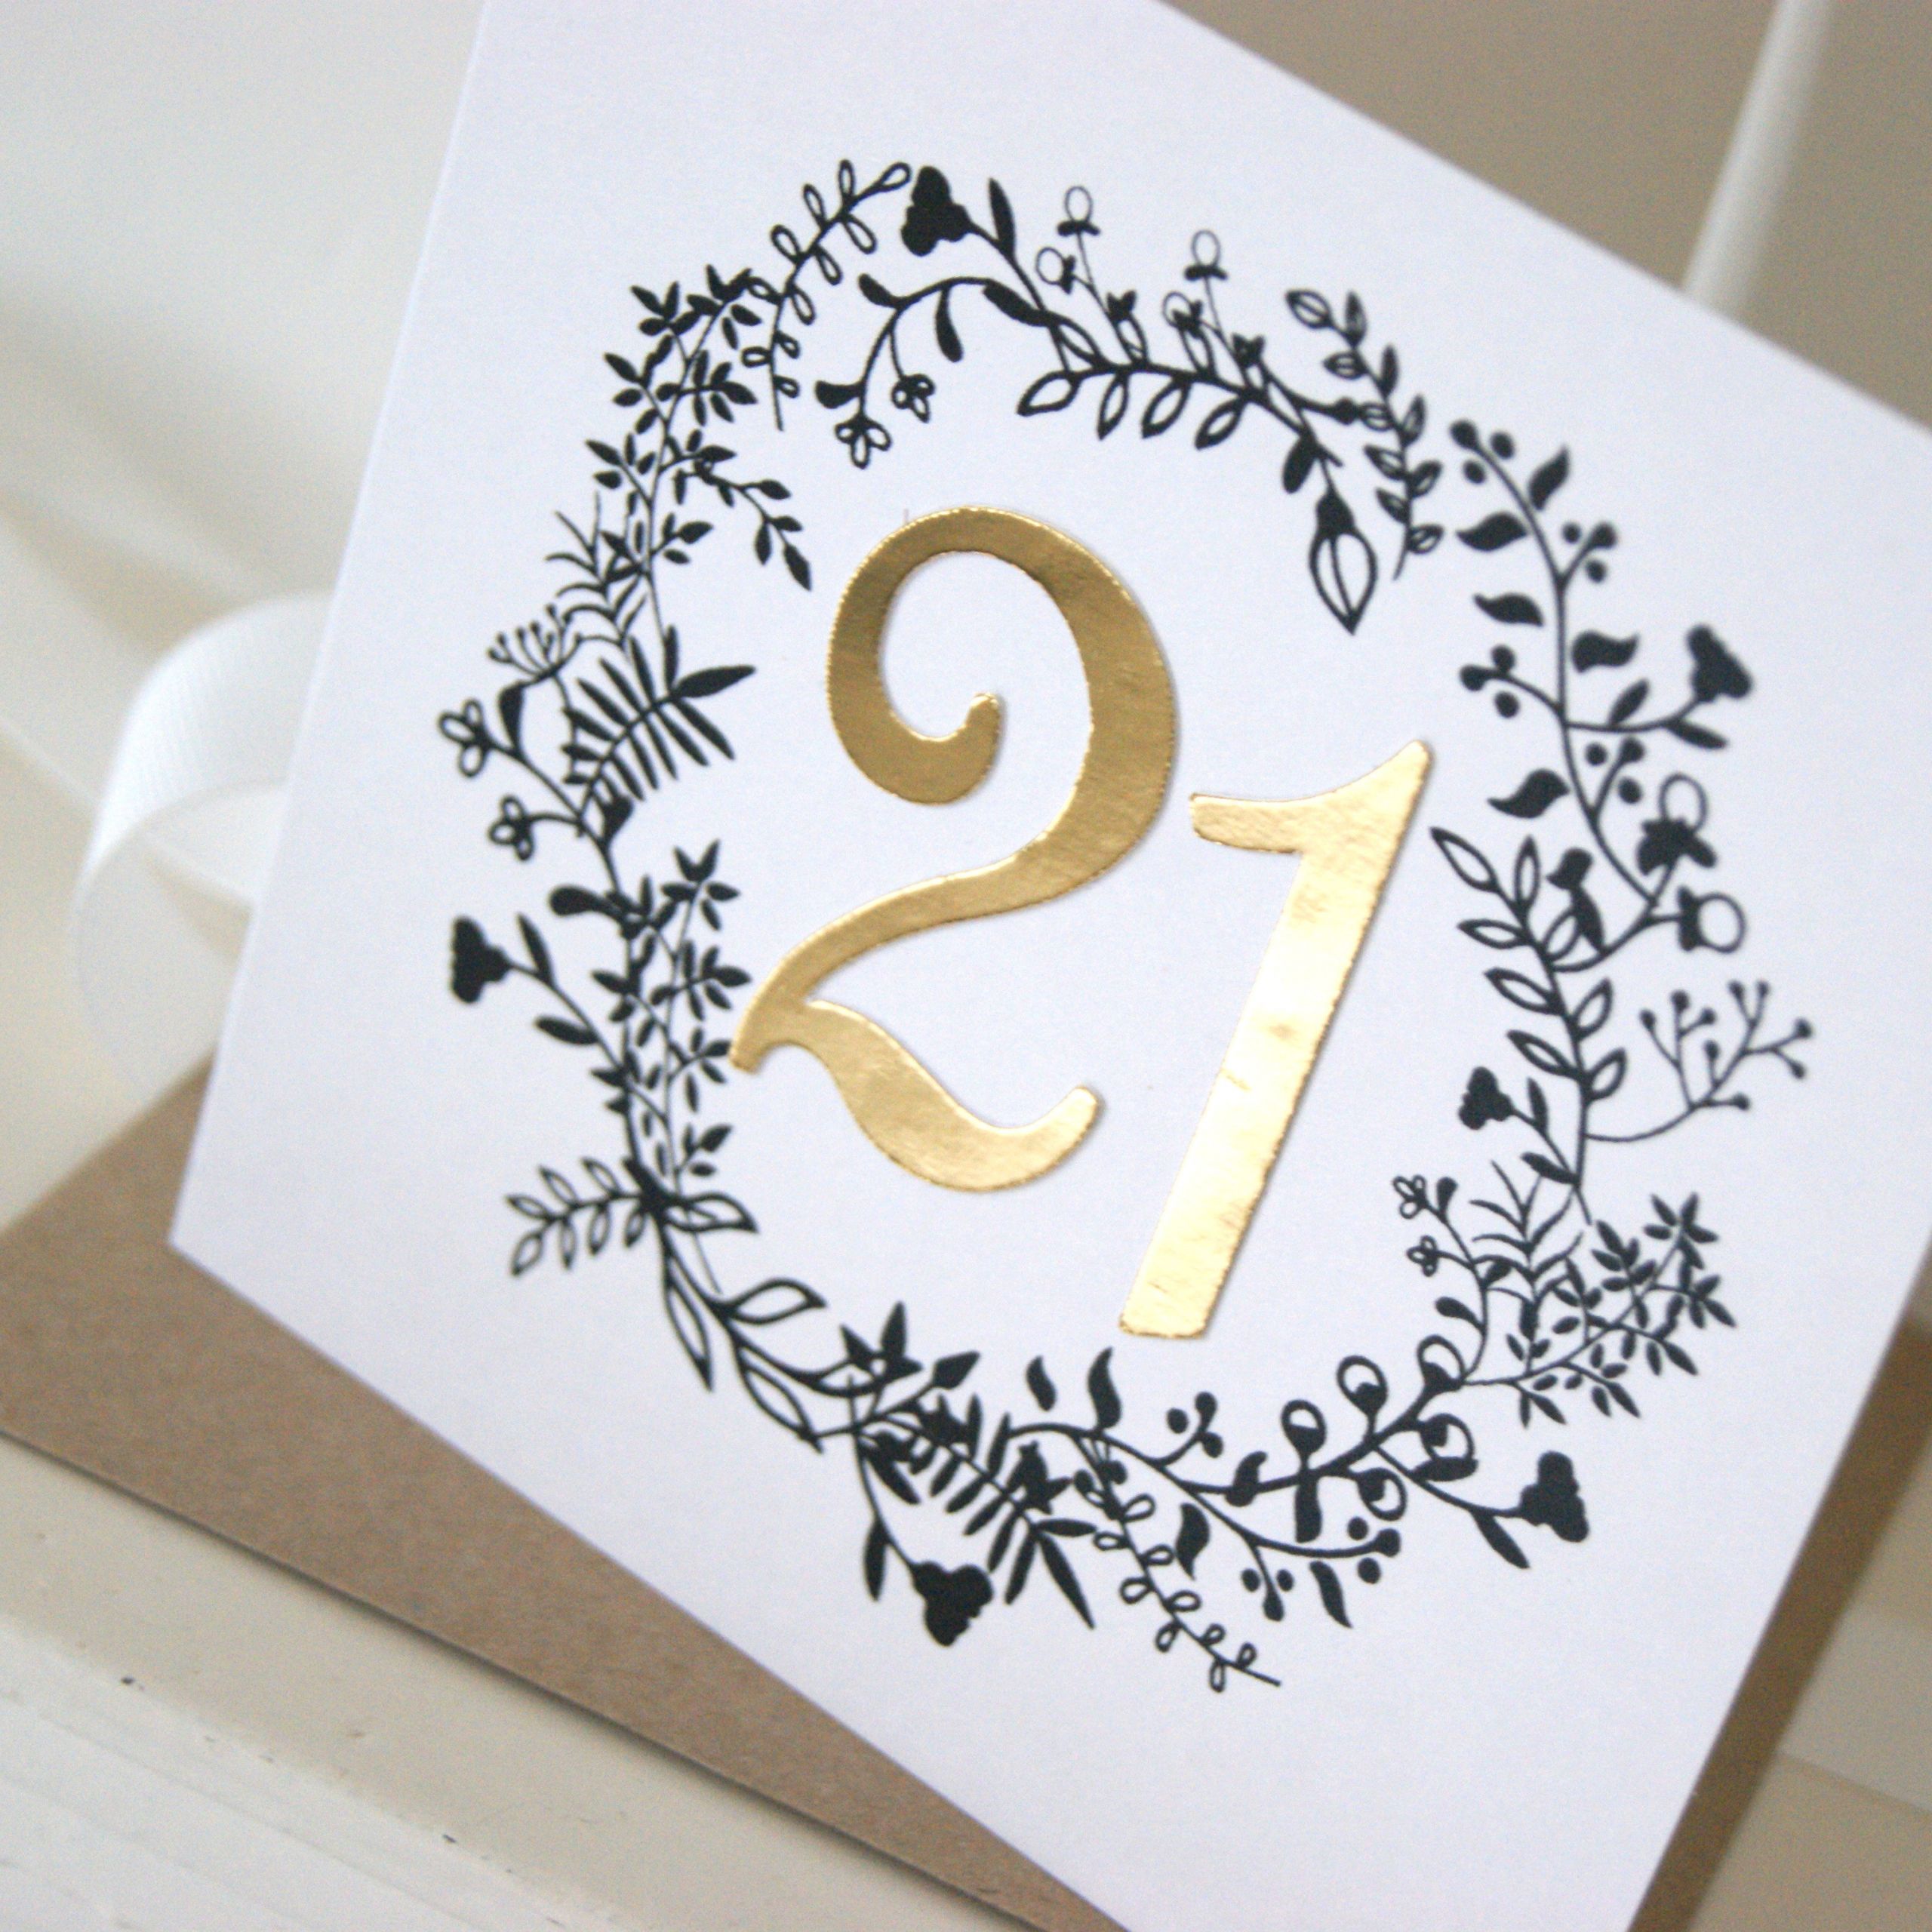 21st Birthday Cards
 Luxe Gold 21st Birthday Card